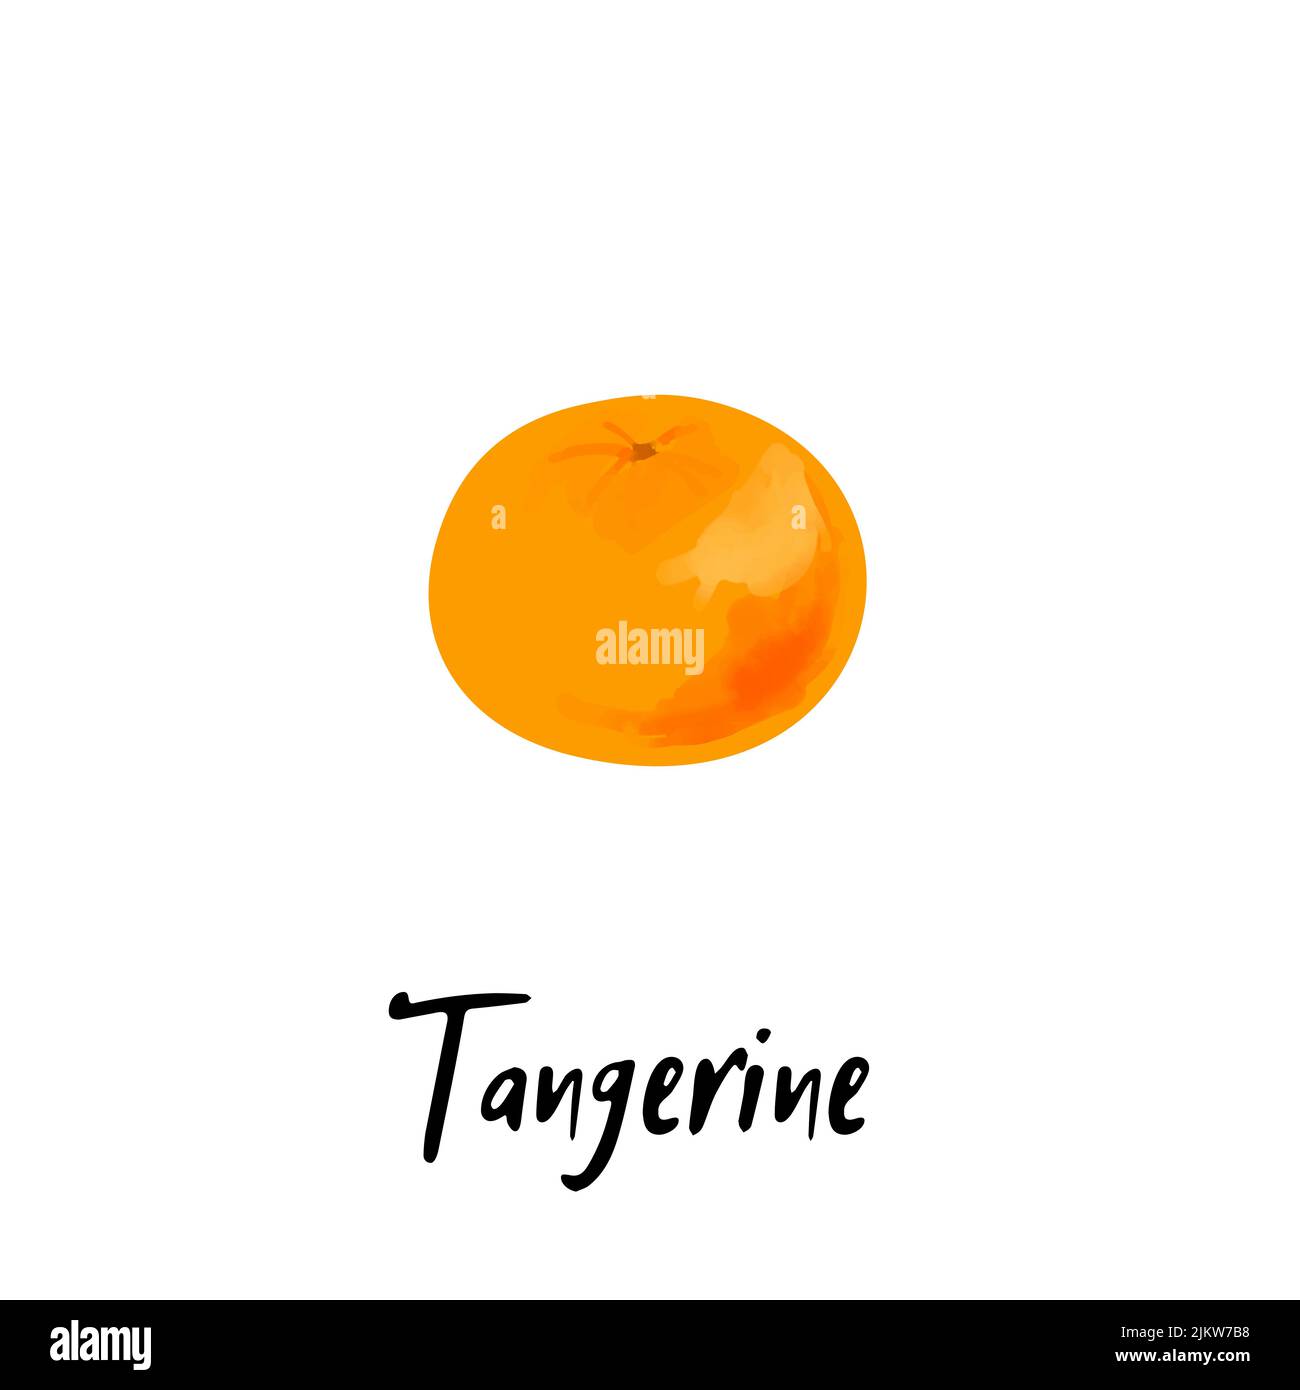 Illustration a tangerine isolated on a white background Stock Vector